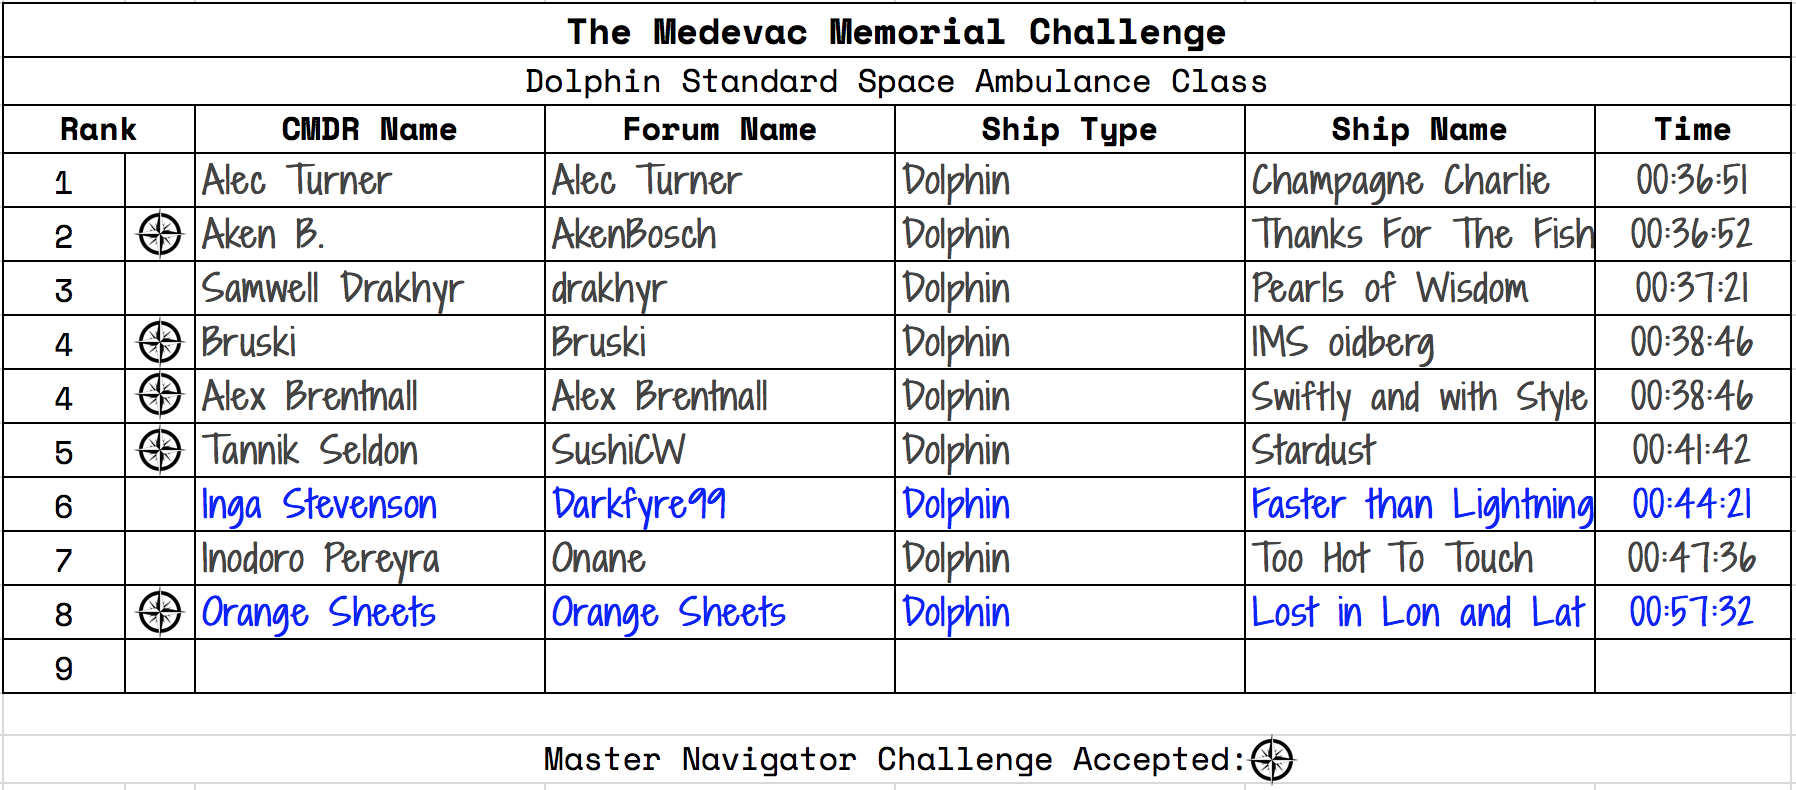 The Medevac Memorial Challenge Results: Dolphin